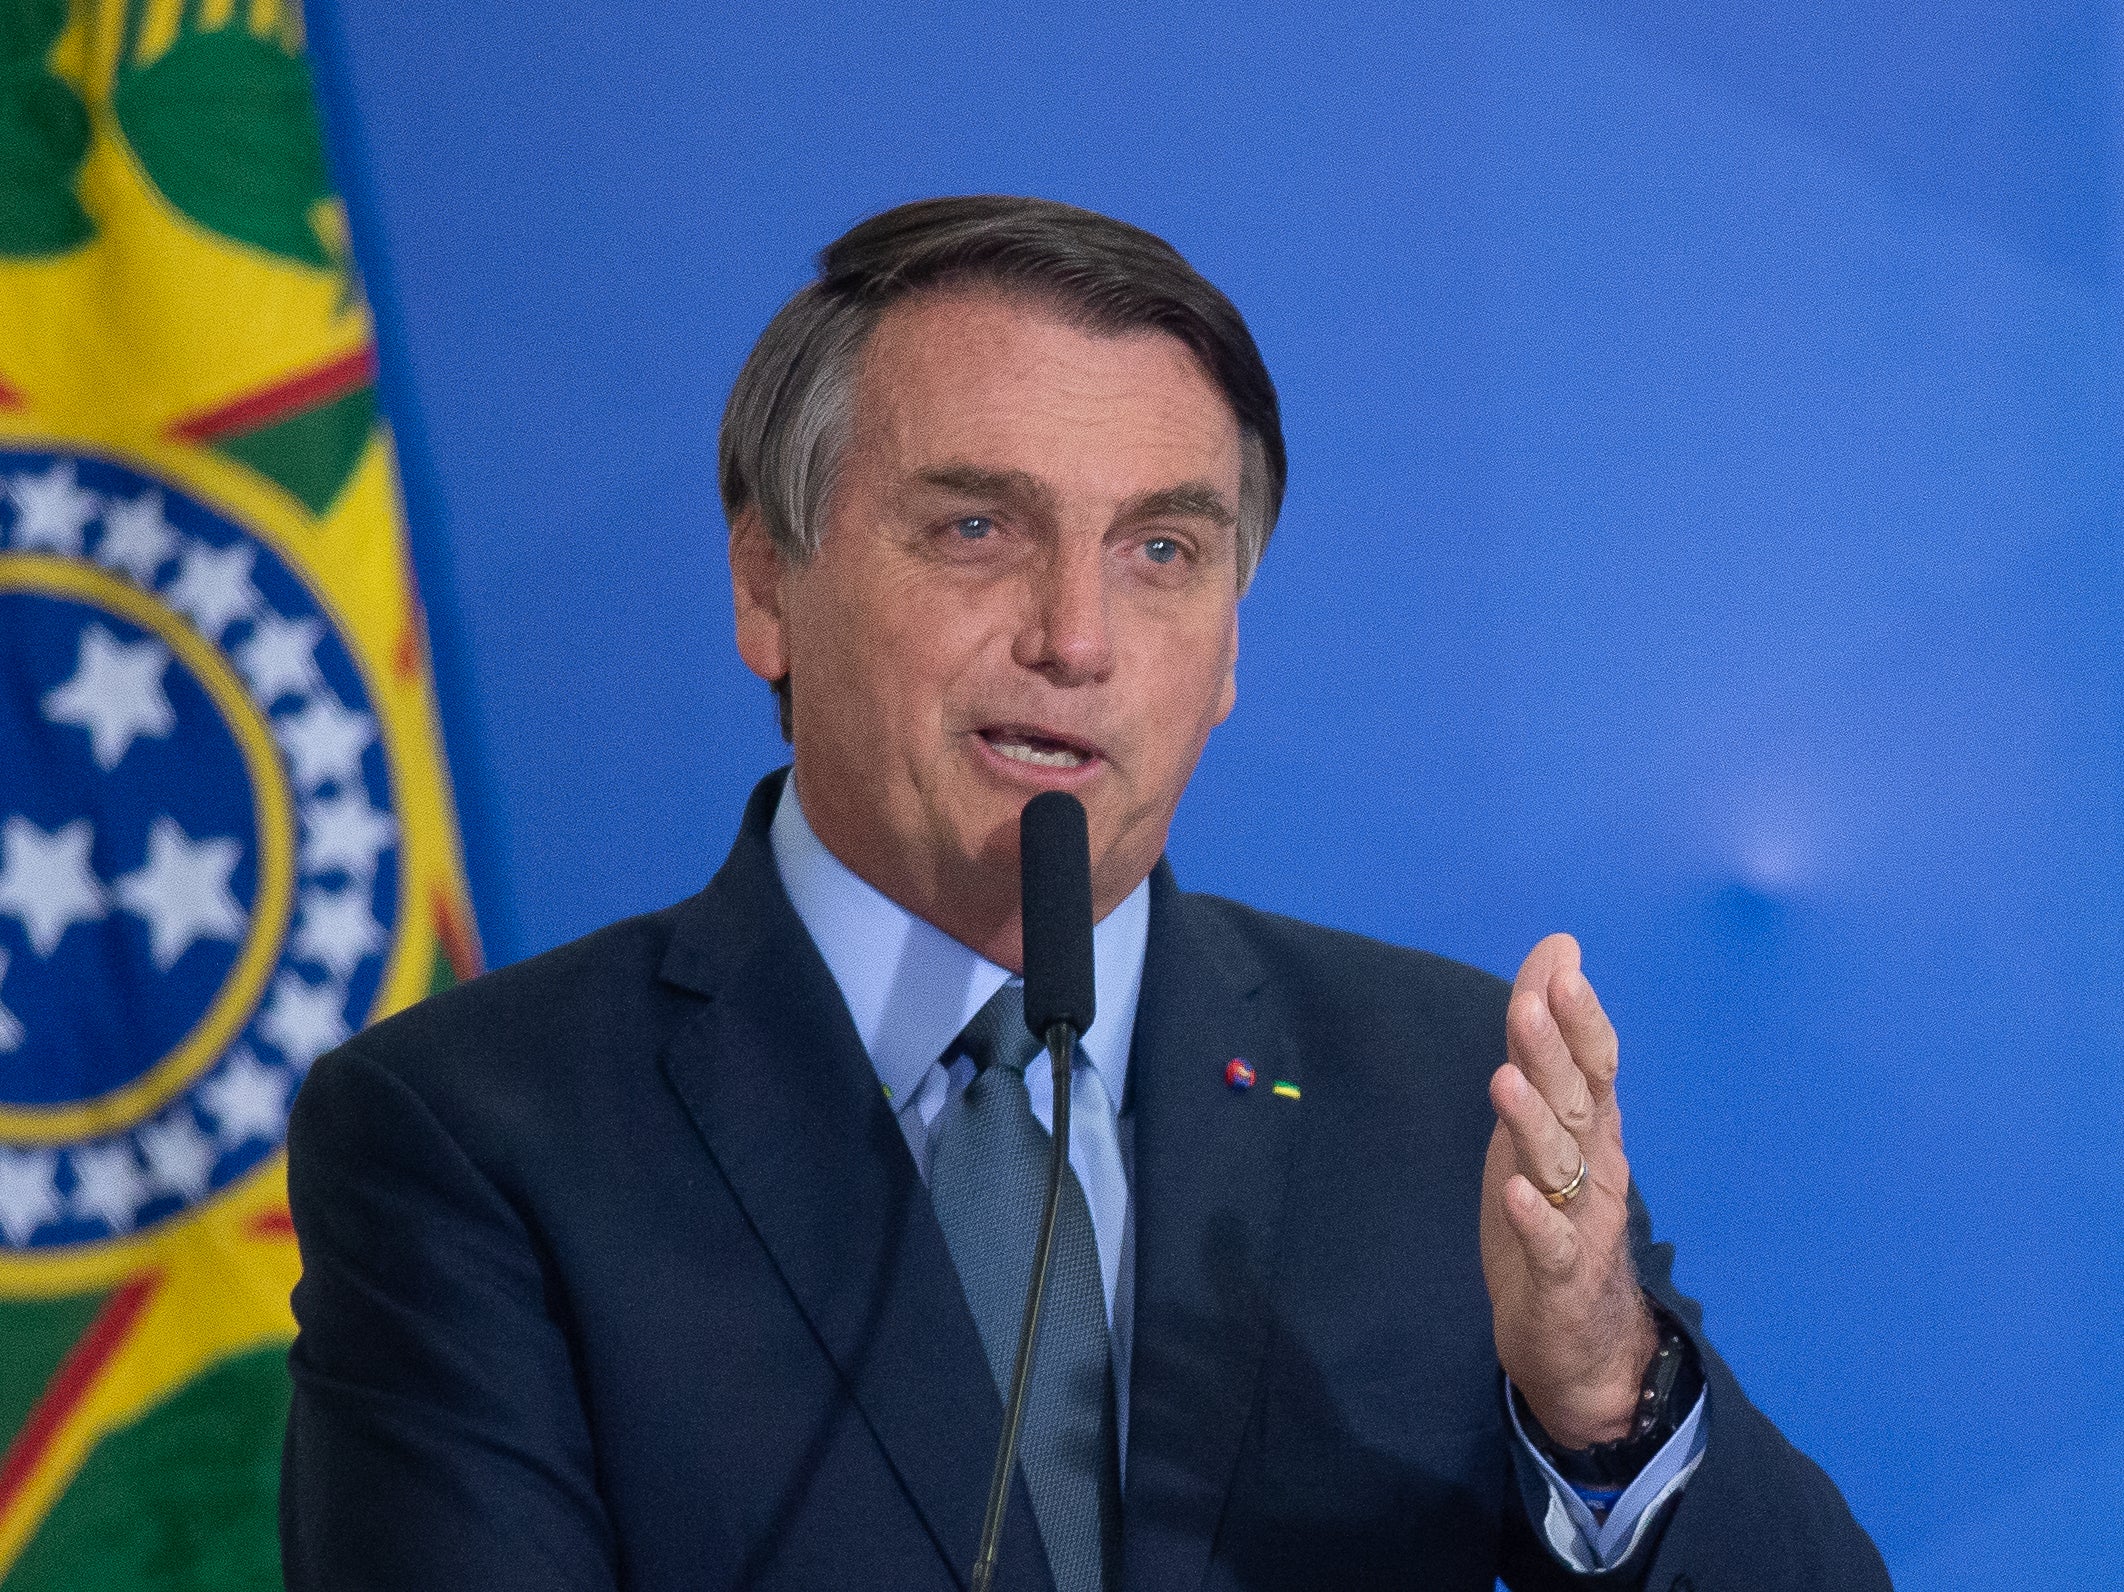 Bolsonaro likely to face increased pressure from a US led by Biden